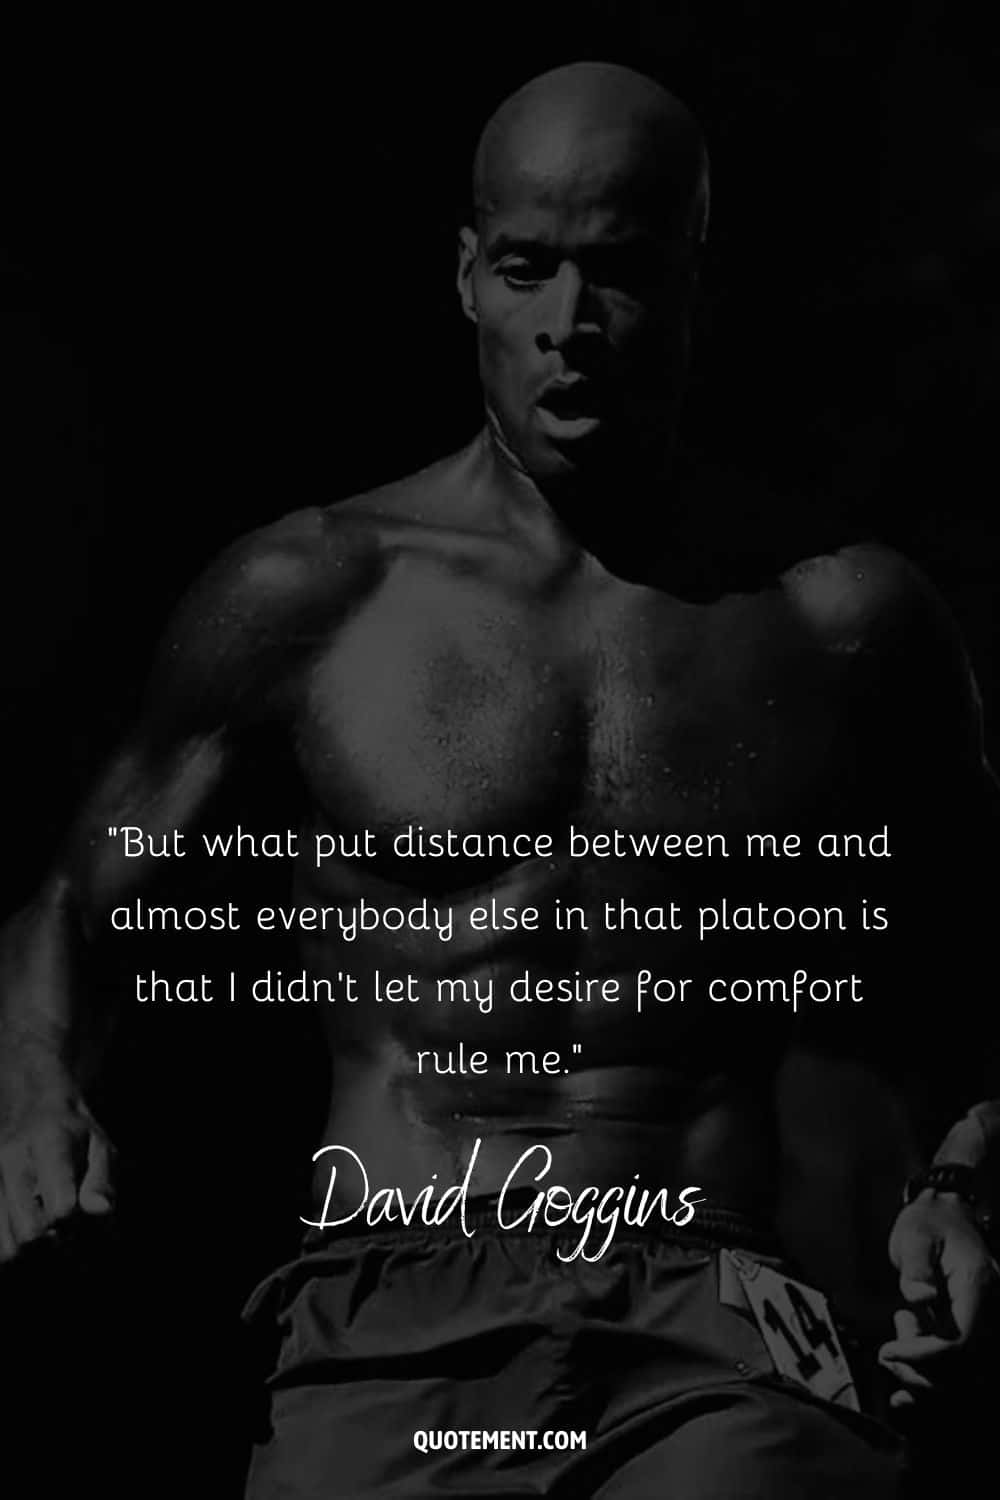 Quote from famous David Goggins and his black and white photo